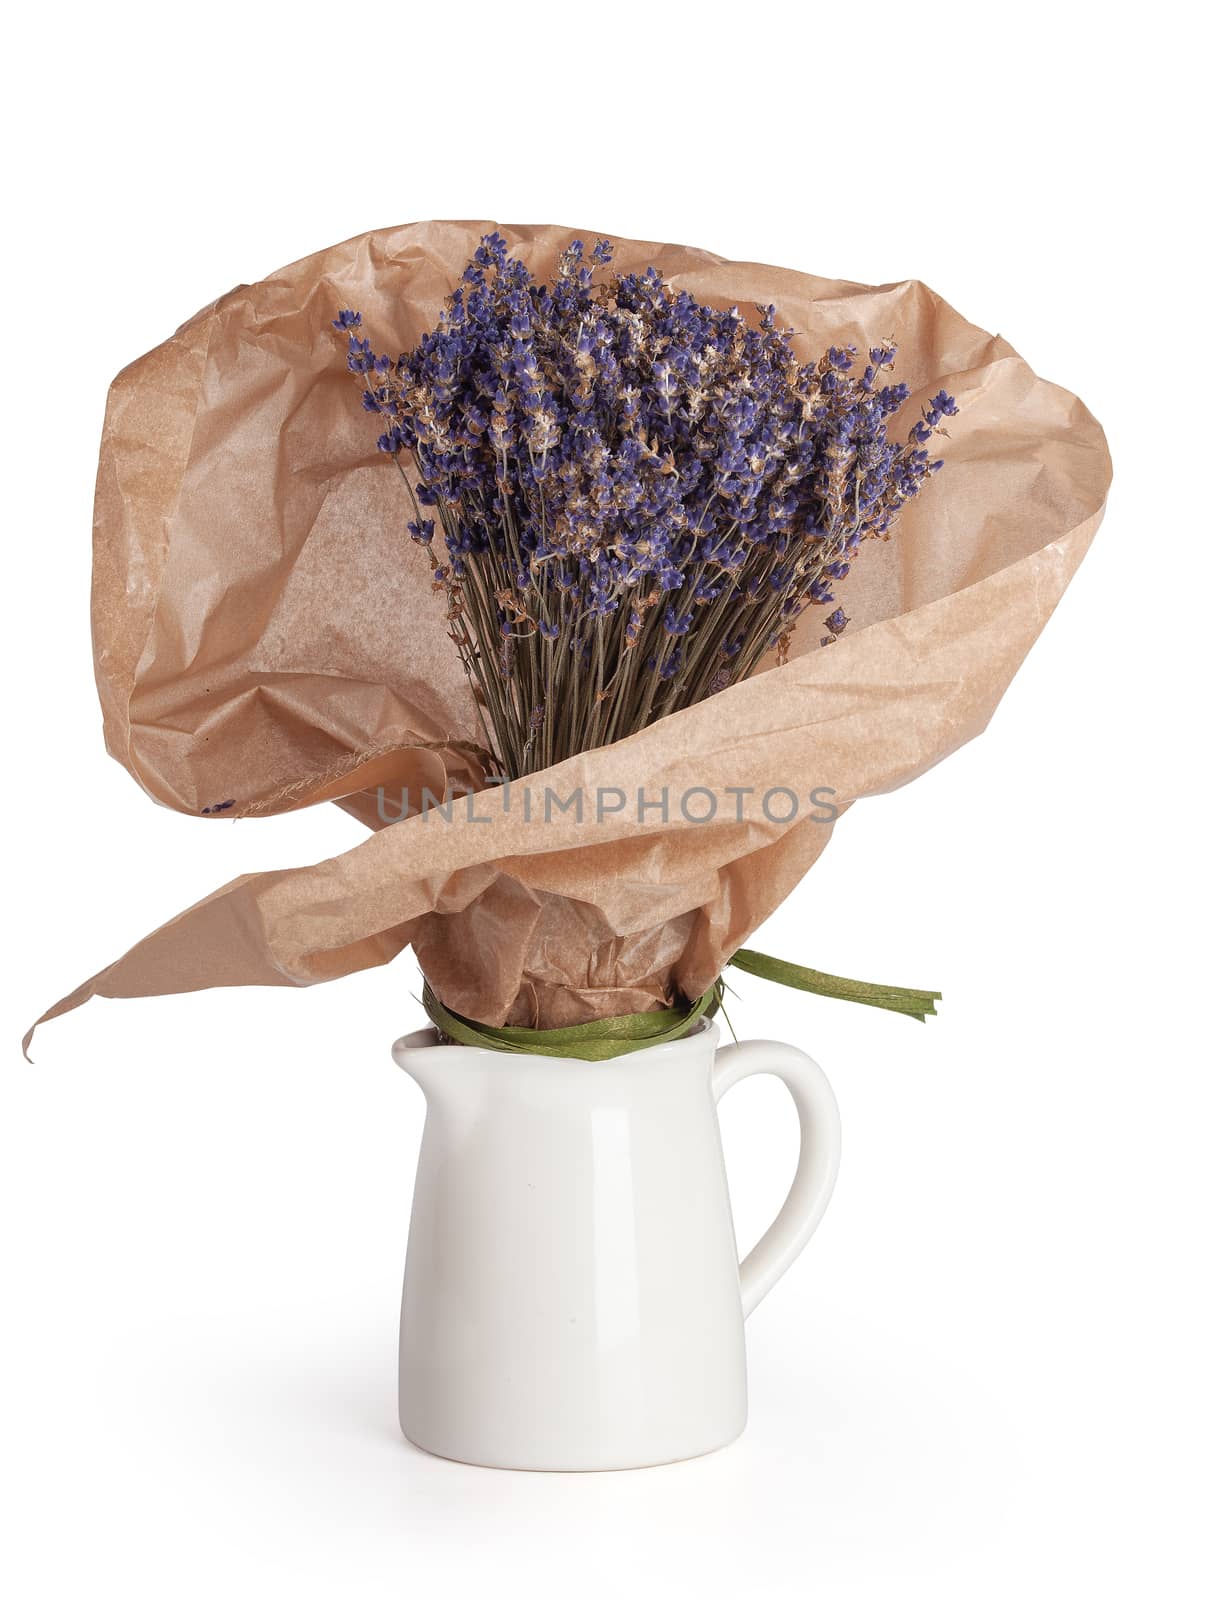 Dry lavender bouquet in the jug by Angorius